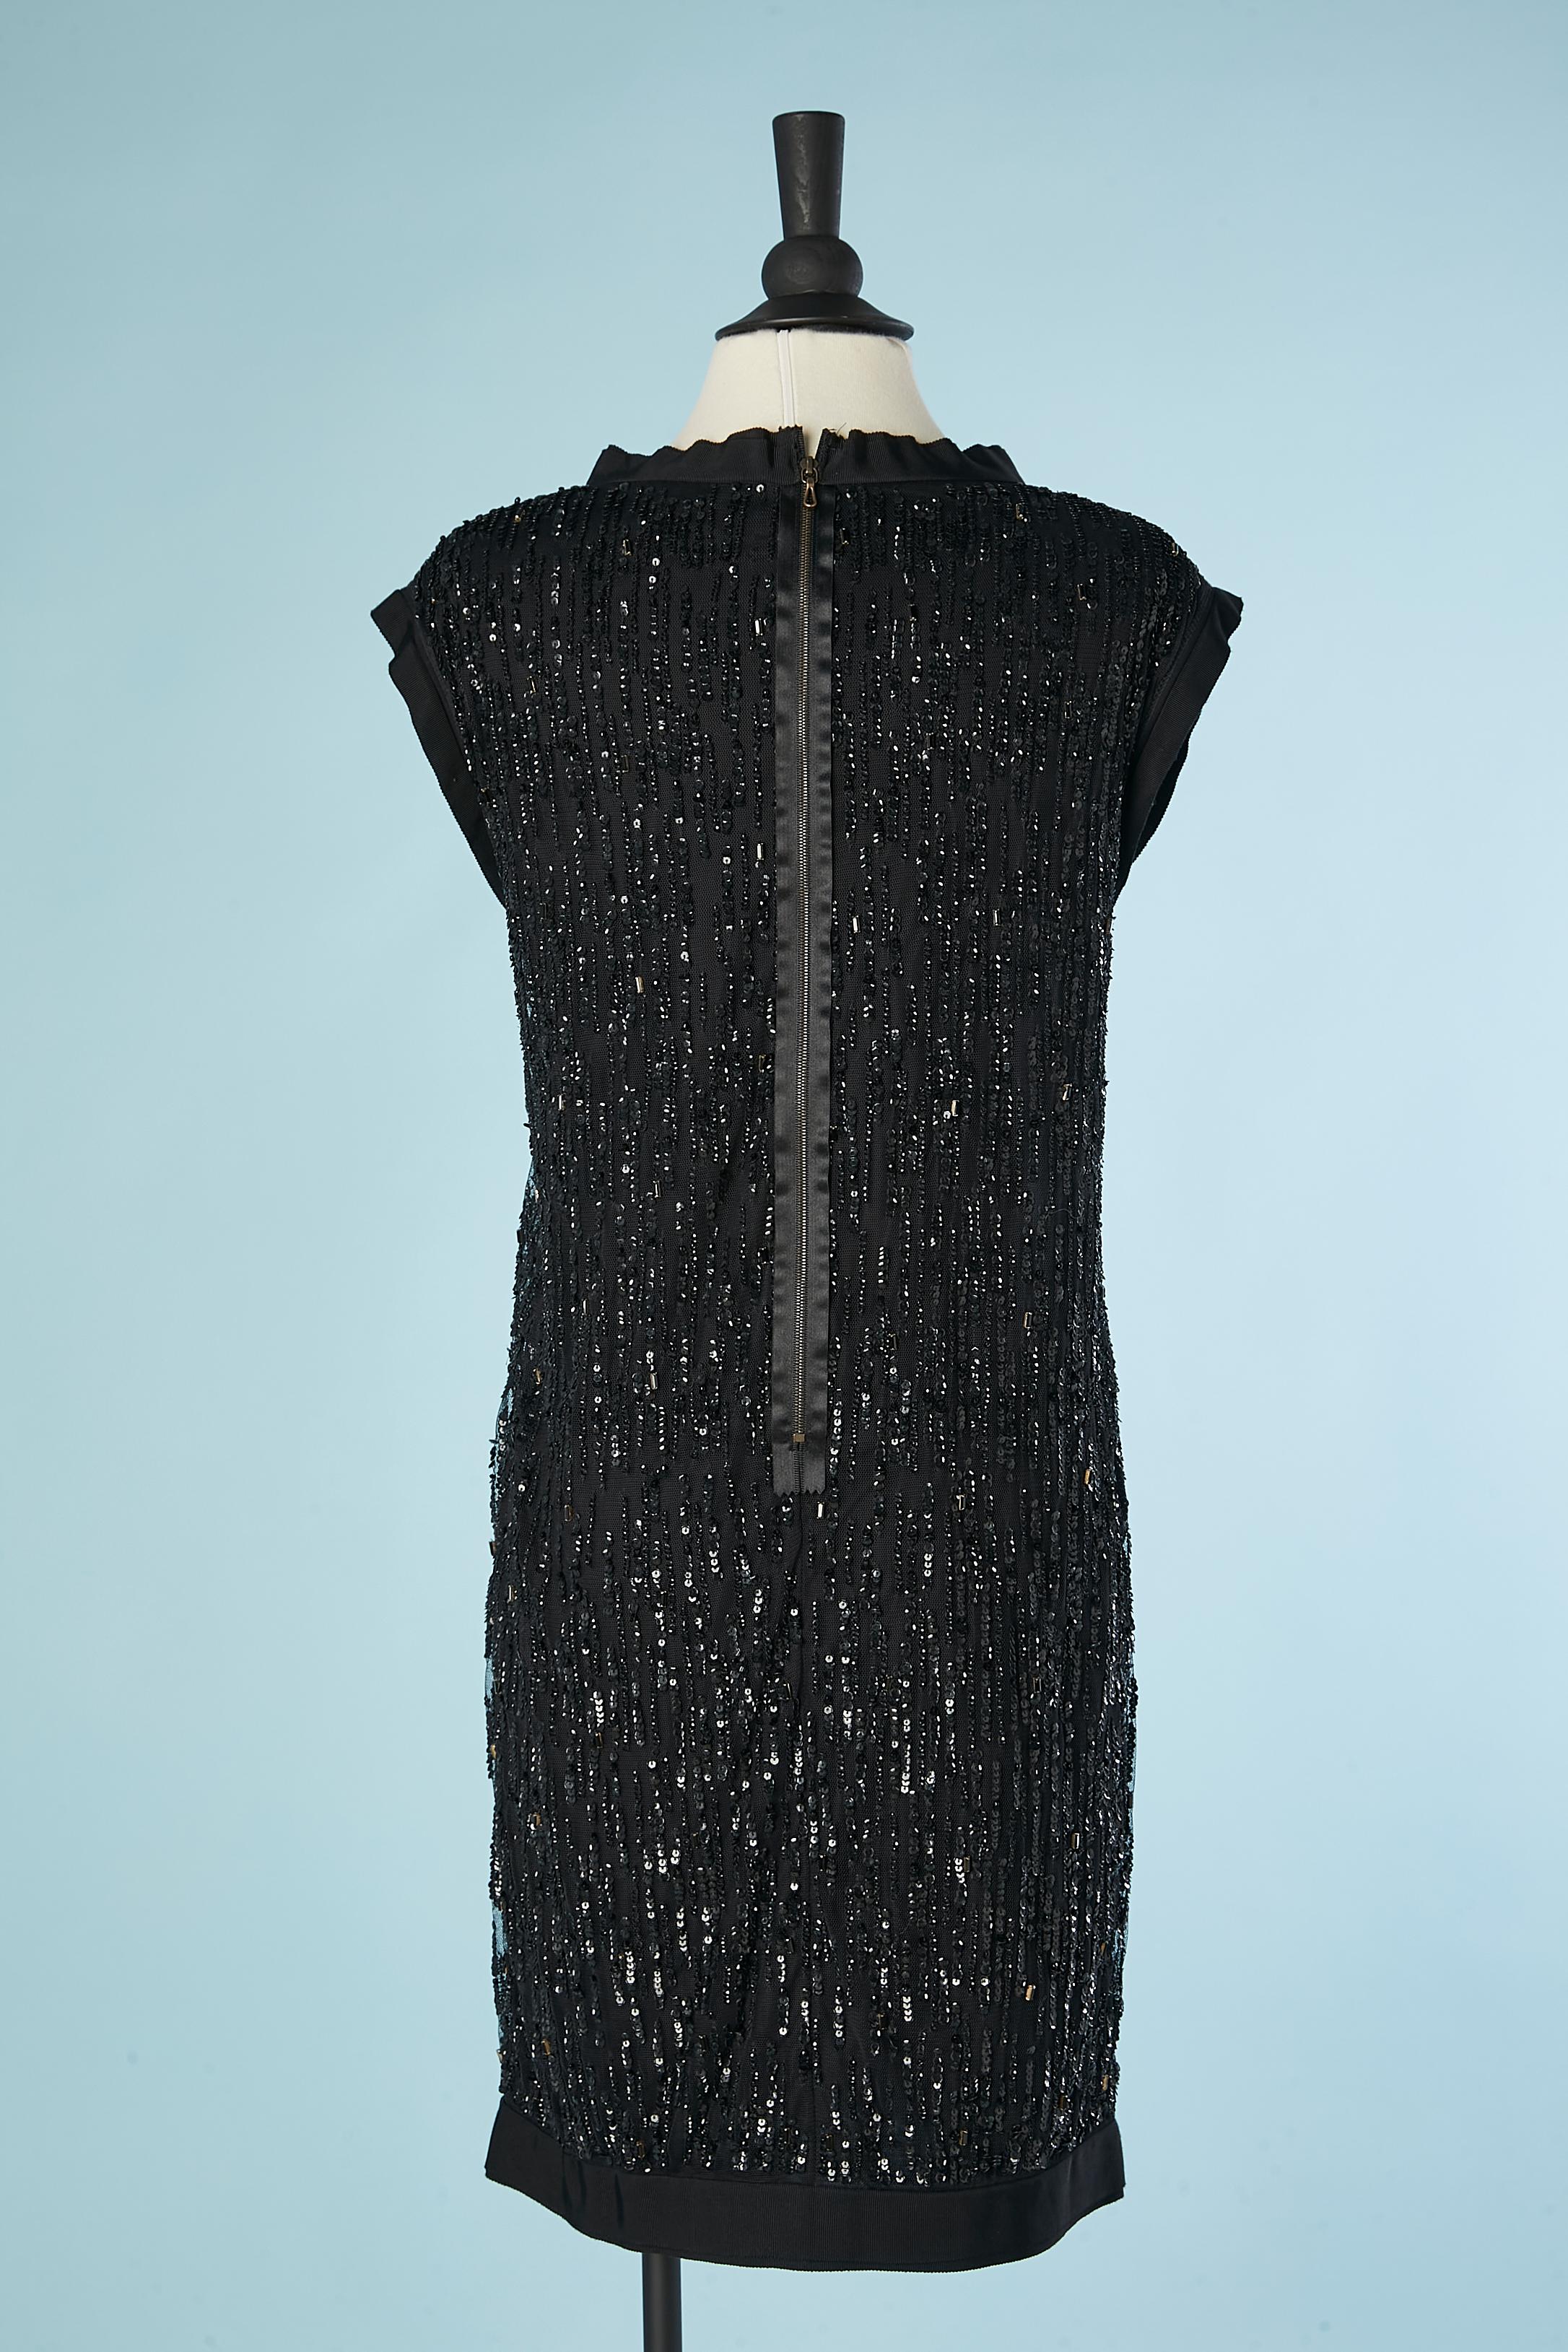 Black sequin dress on tulle base with rhinestone brooches Lanvin by Alber Elbaz For Sale 3